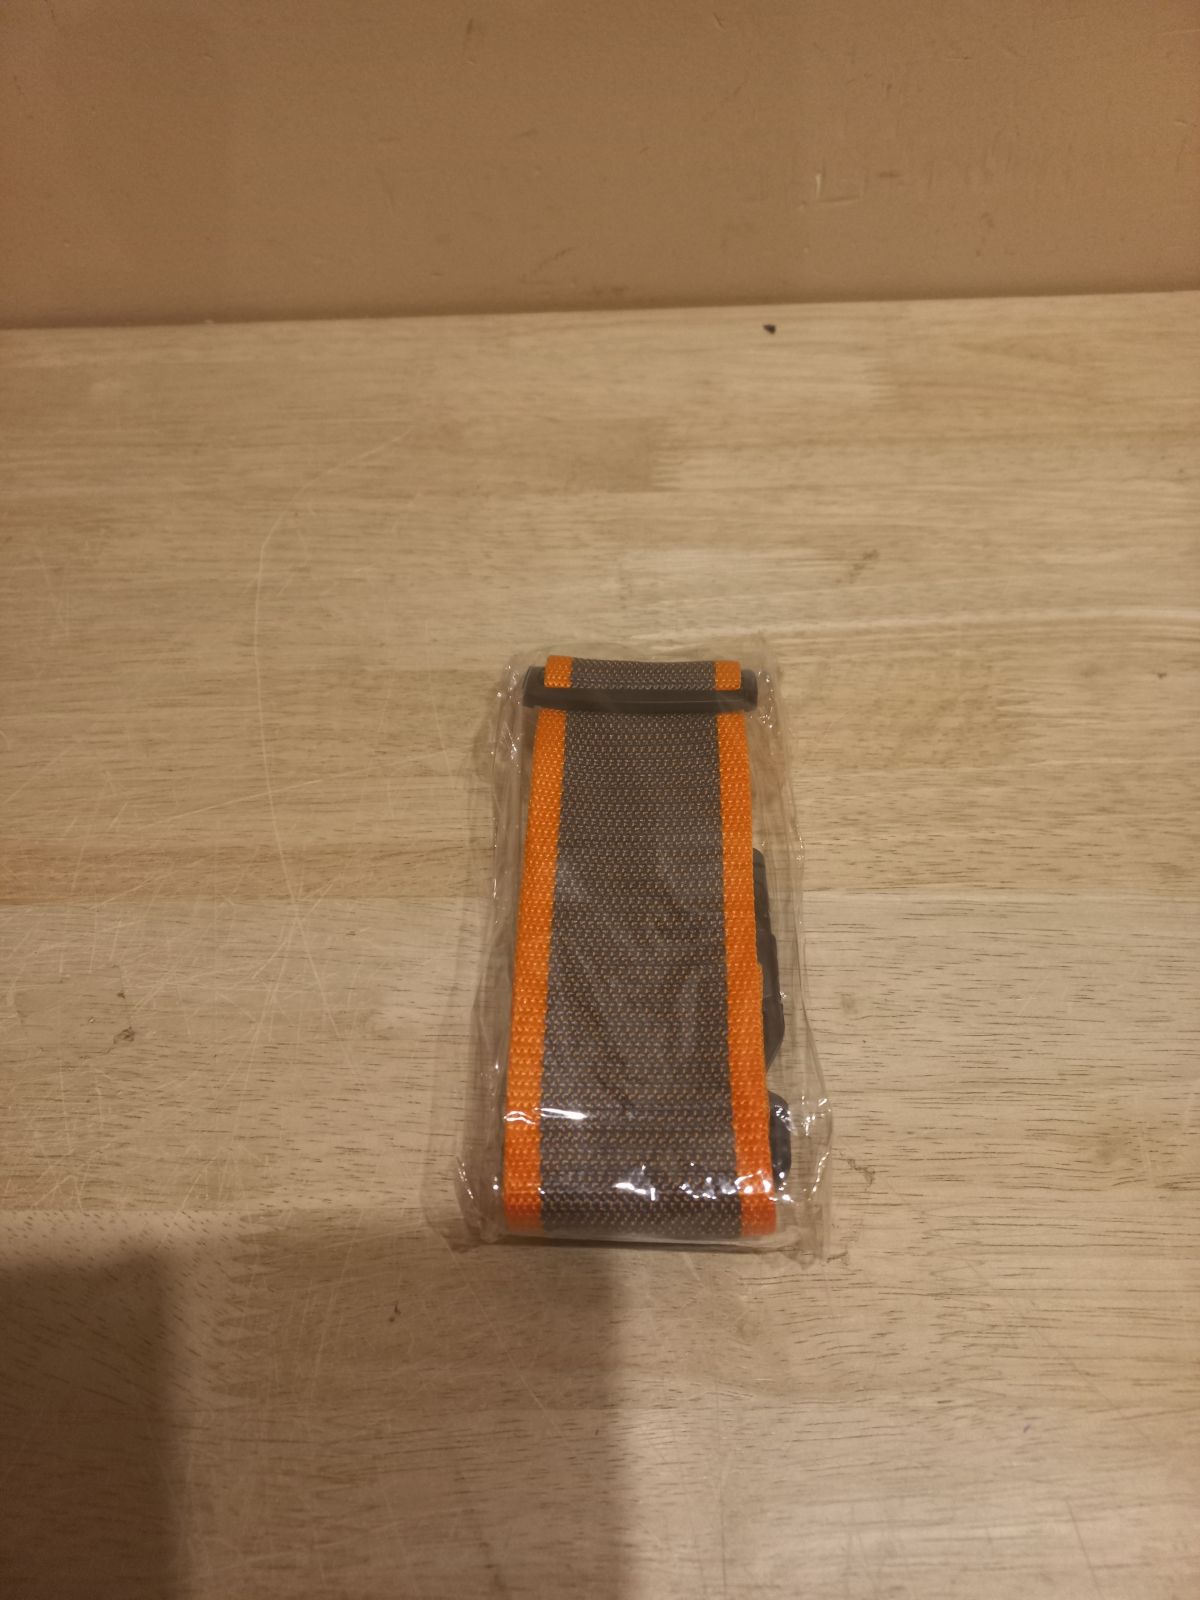 Luggage strap for a suitcase